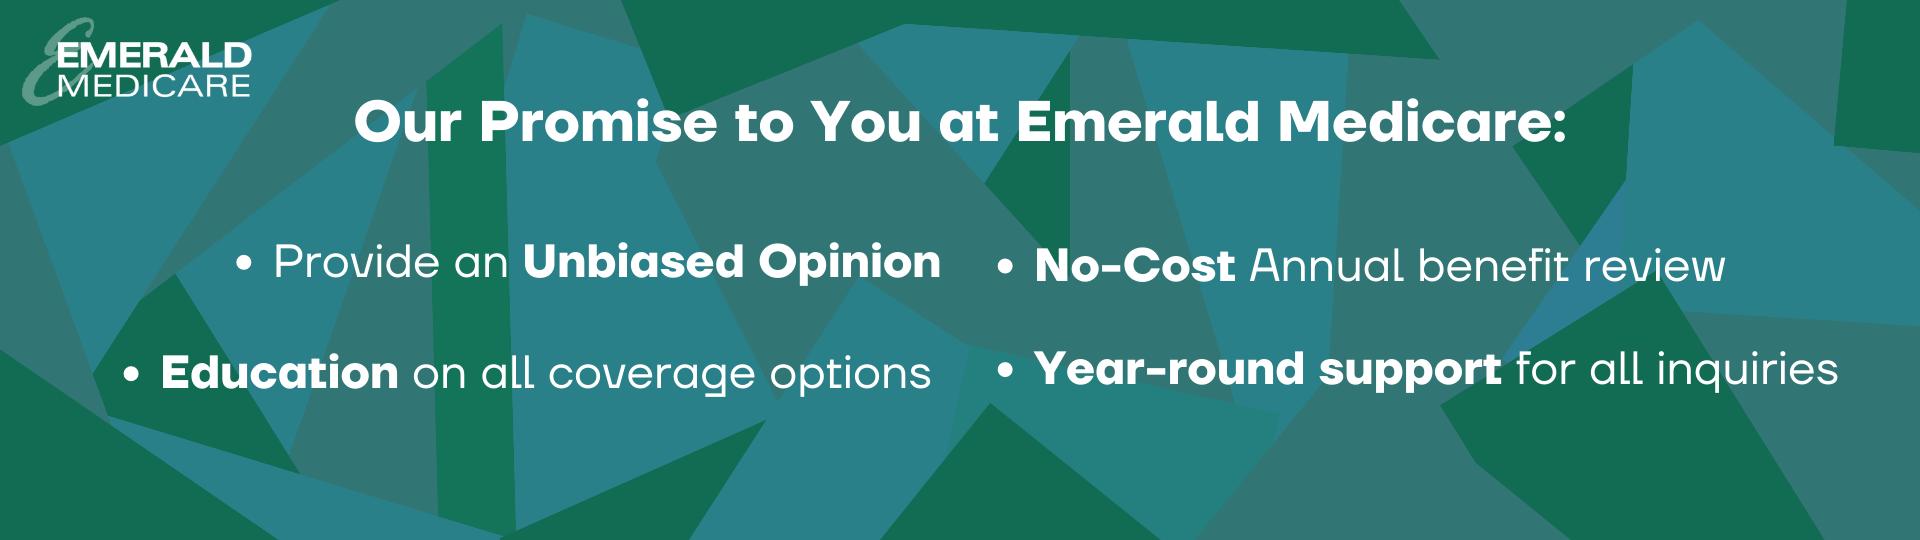 Our Promise to you at emerald medicare. Provide an unbiased opinion. No-Cost annual benefit review. Education on all coverage options. Year-round support for all inquiries